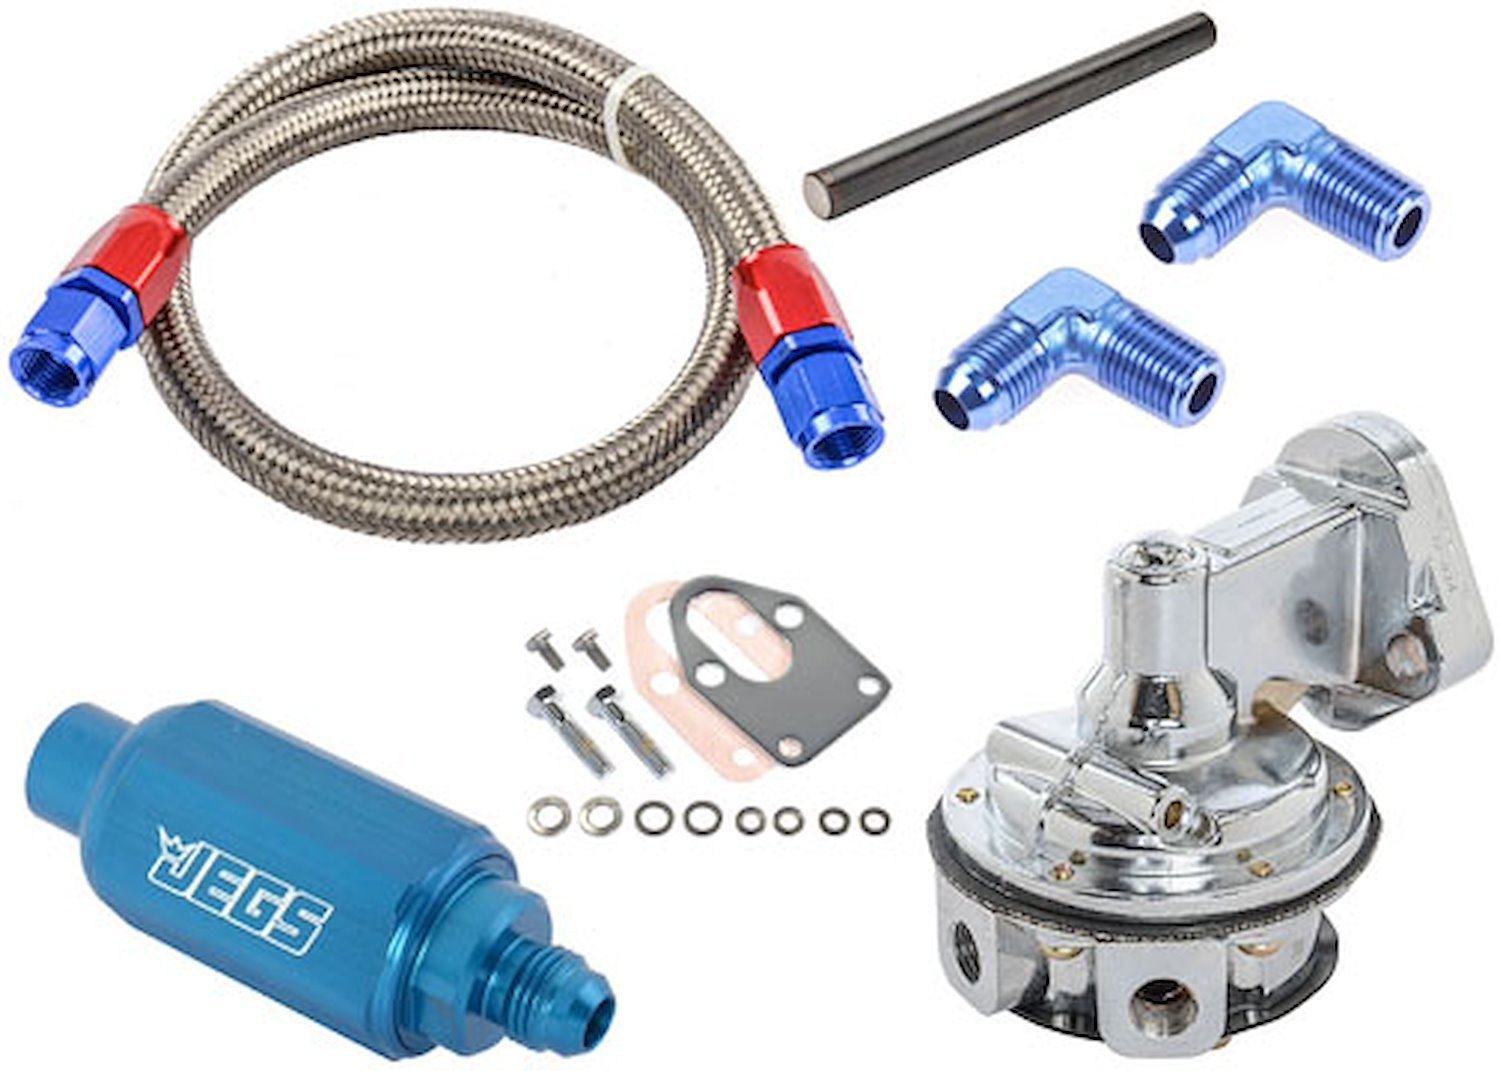 Mechanical Fuel Pump & Installation Kit for Small Block Chevy 265-283-327-350-400 [80 gph, Blue Fittings]